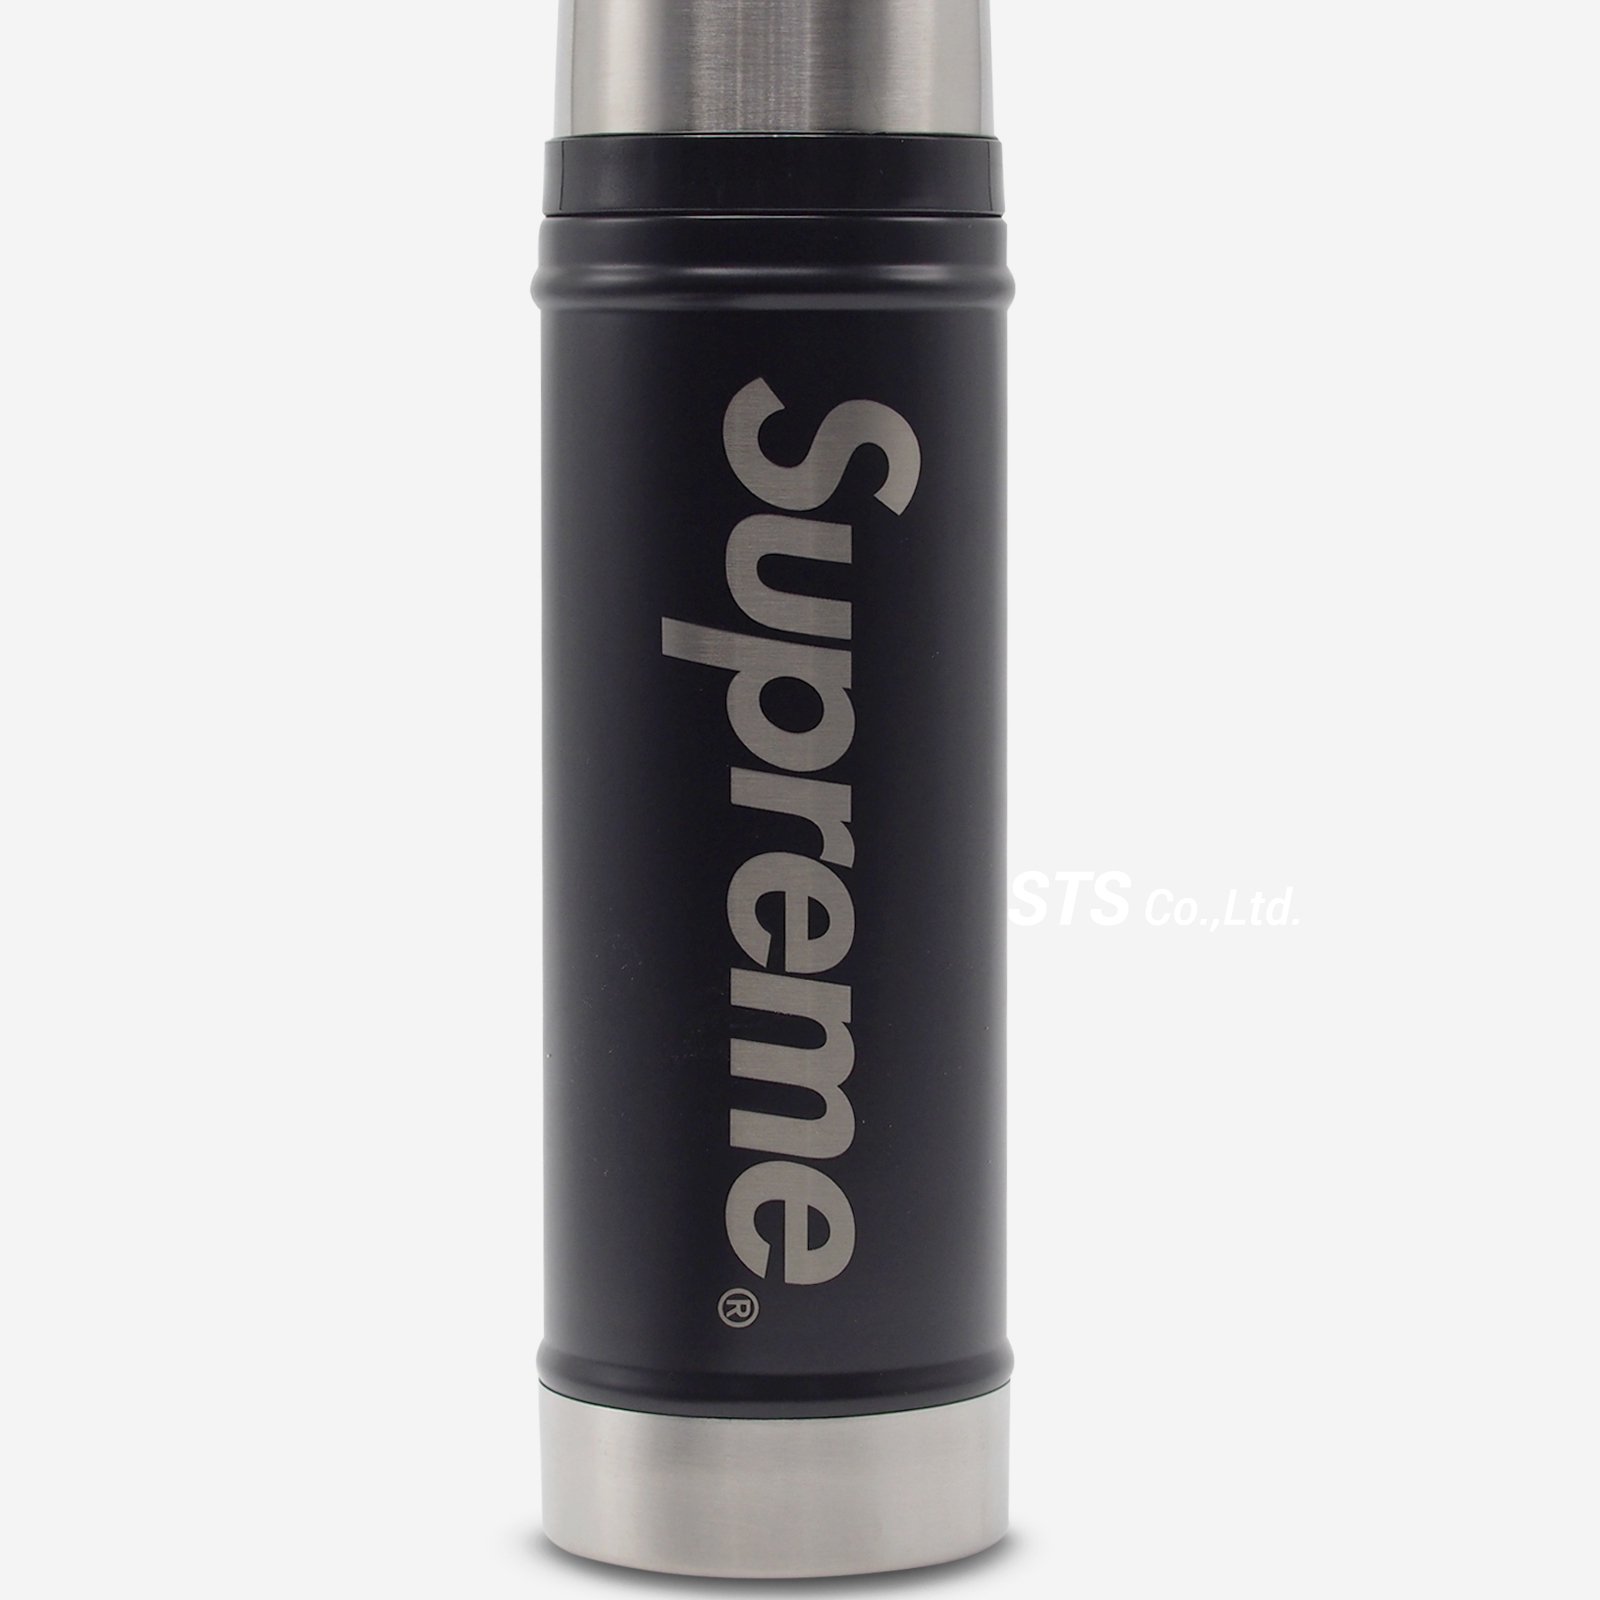 Supreme®/Stanley Vacuum Insulated Bottle